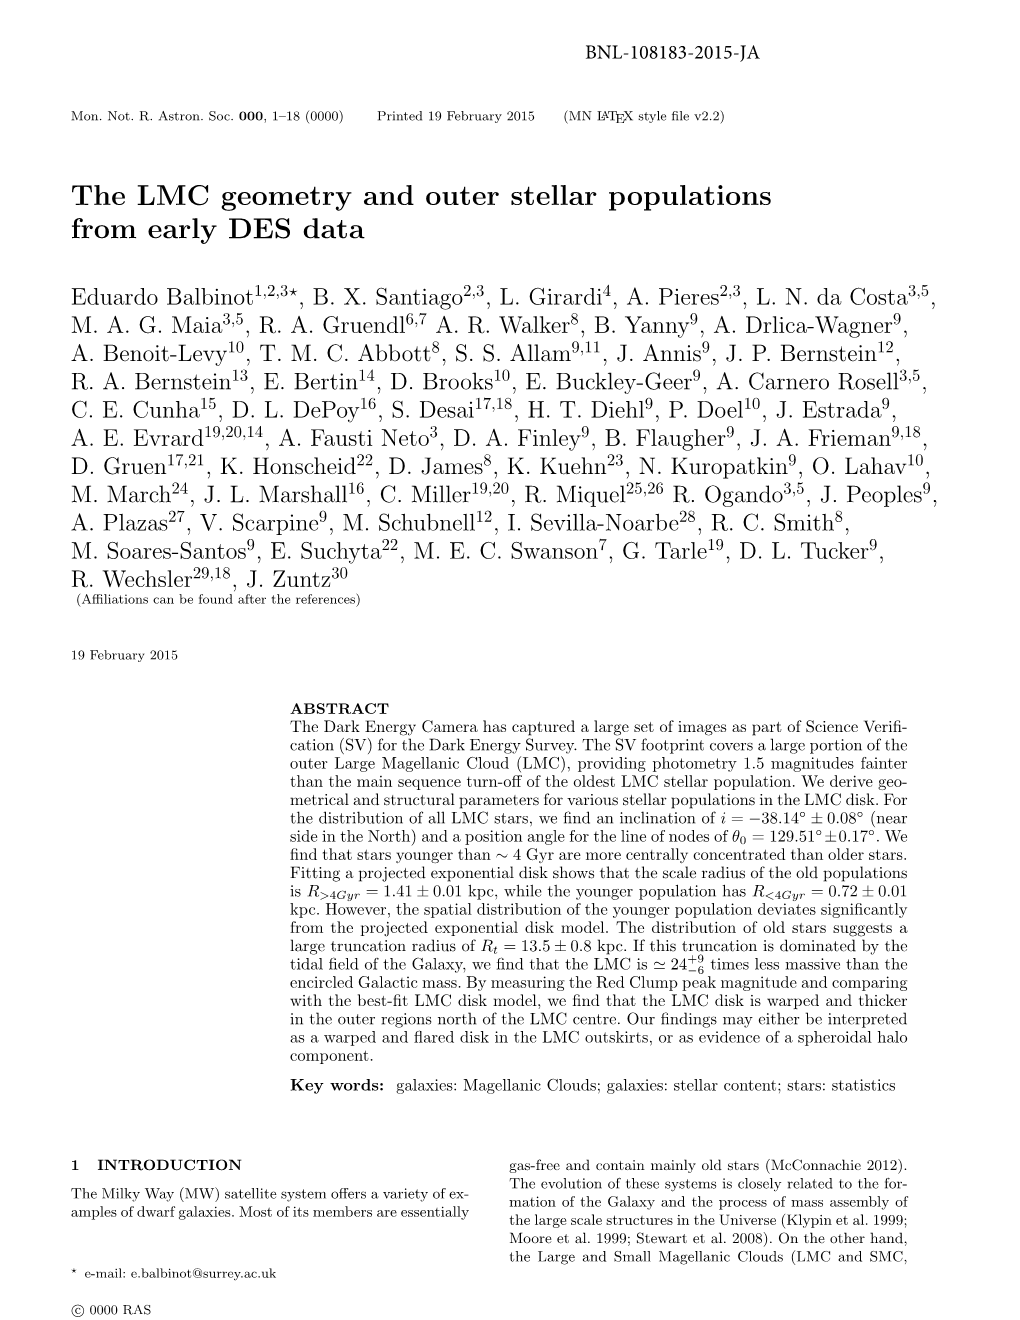 The LMC Geometry and Outer Stellar Populations from Early DES Data